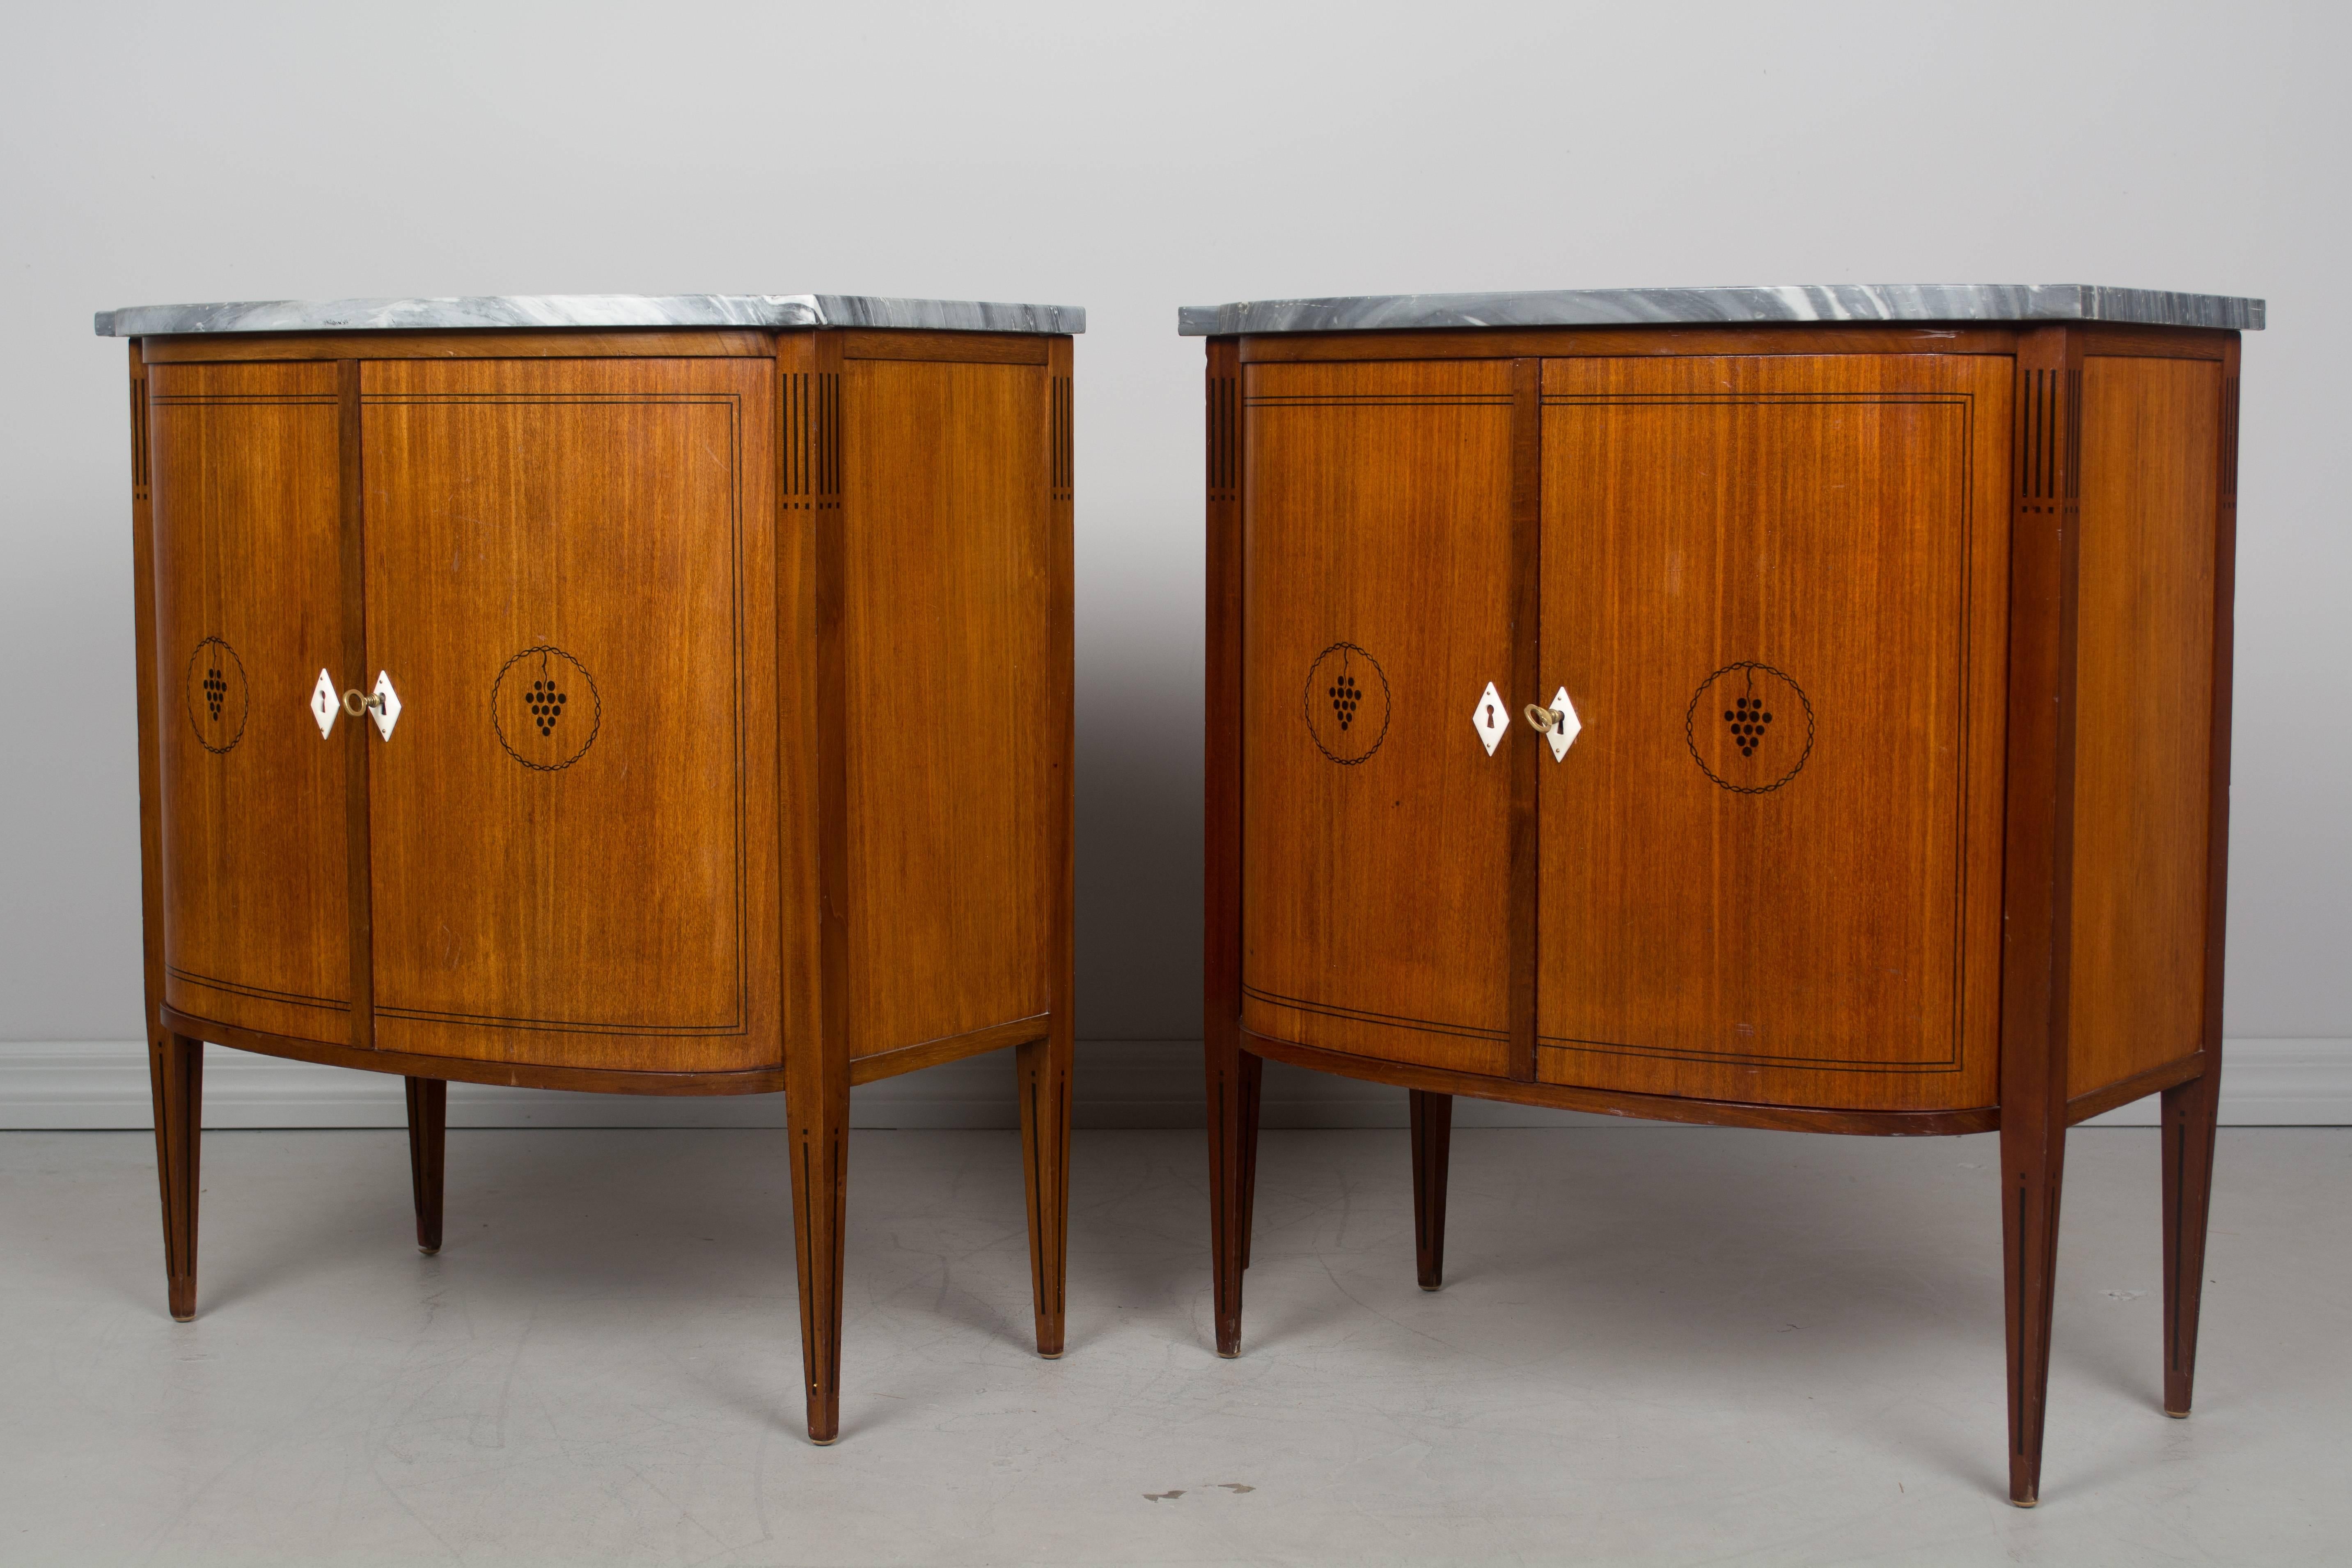 20th Century Pair of French Art Deco Style Cabinets